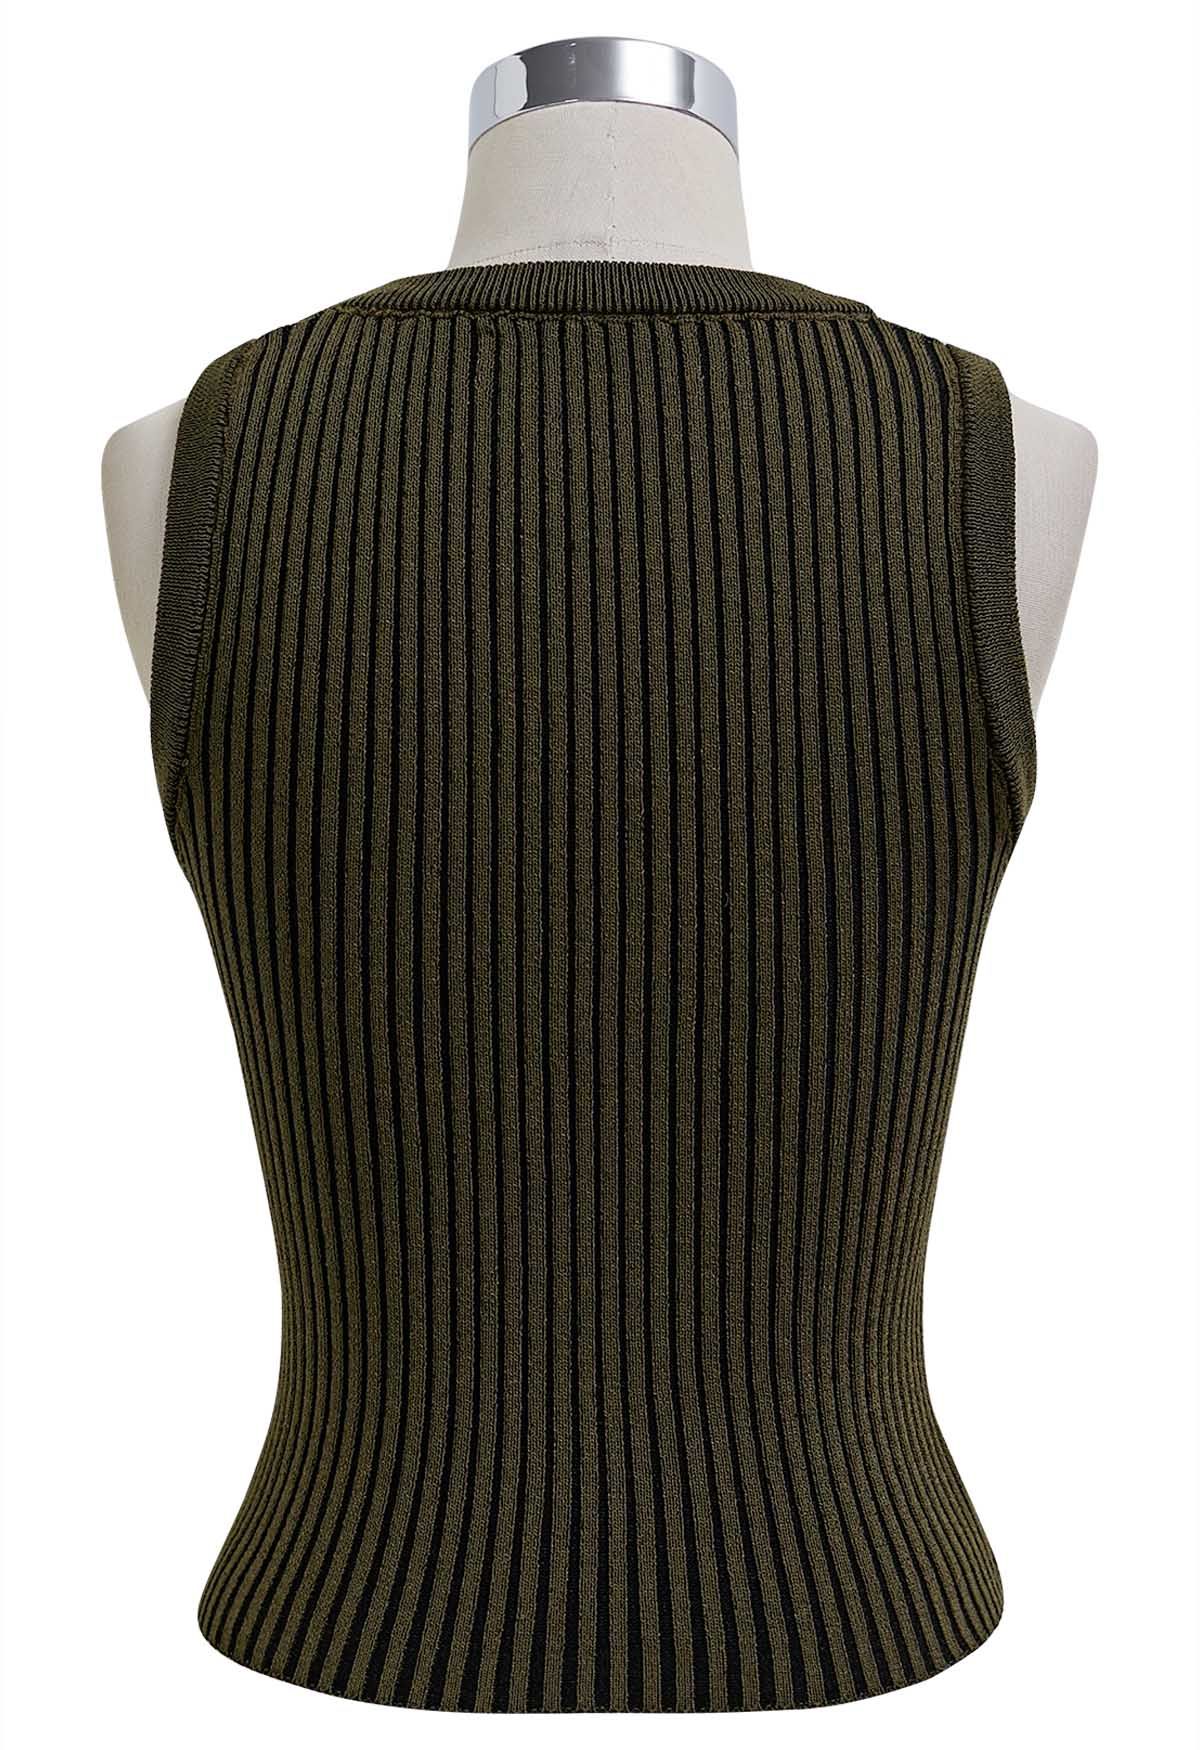 Stripe Texture Knit Tank Top in Army Green